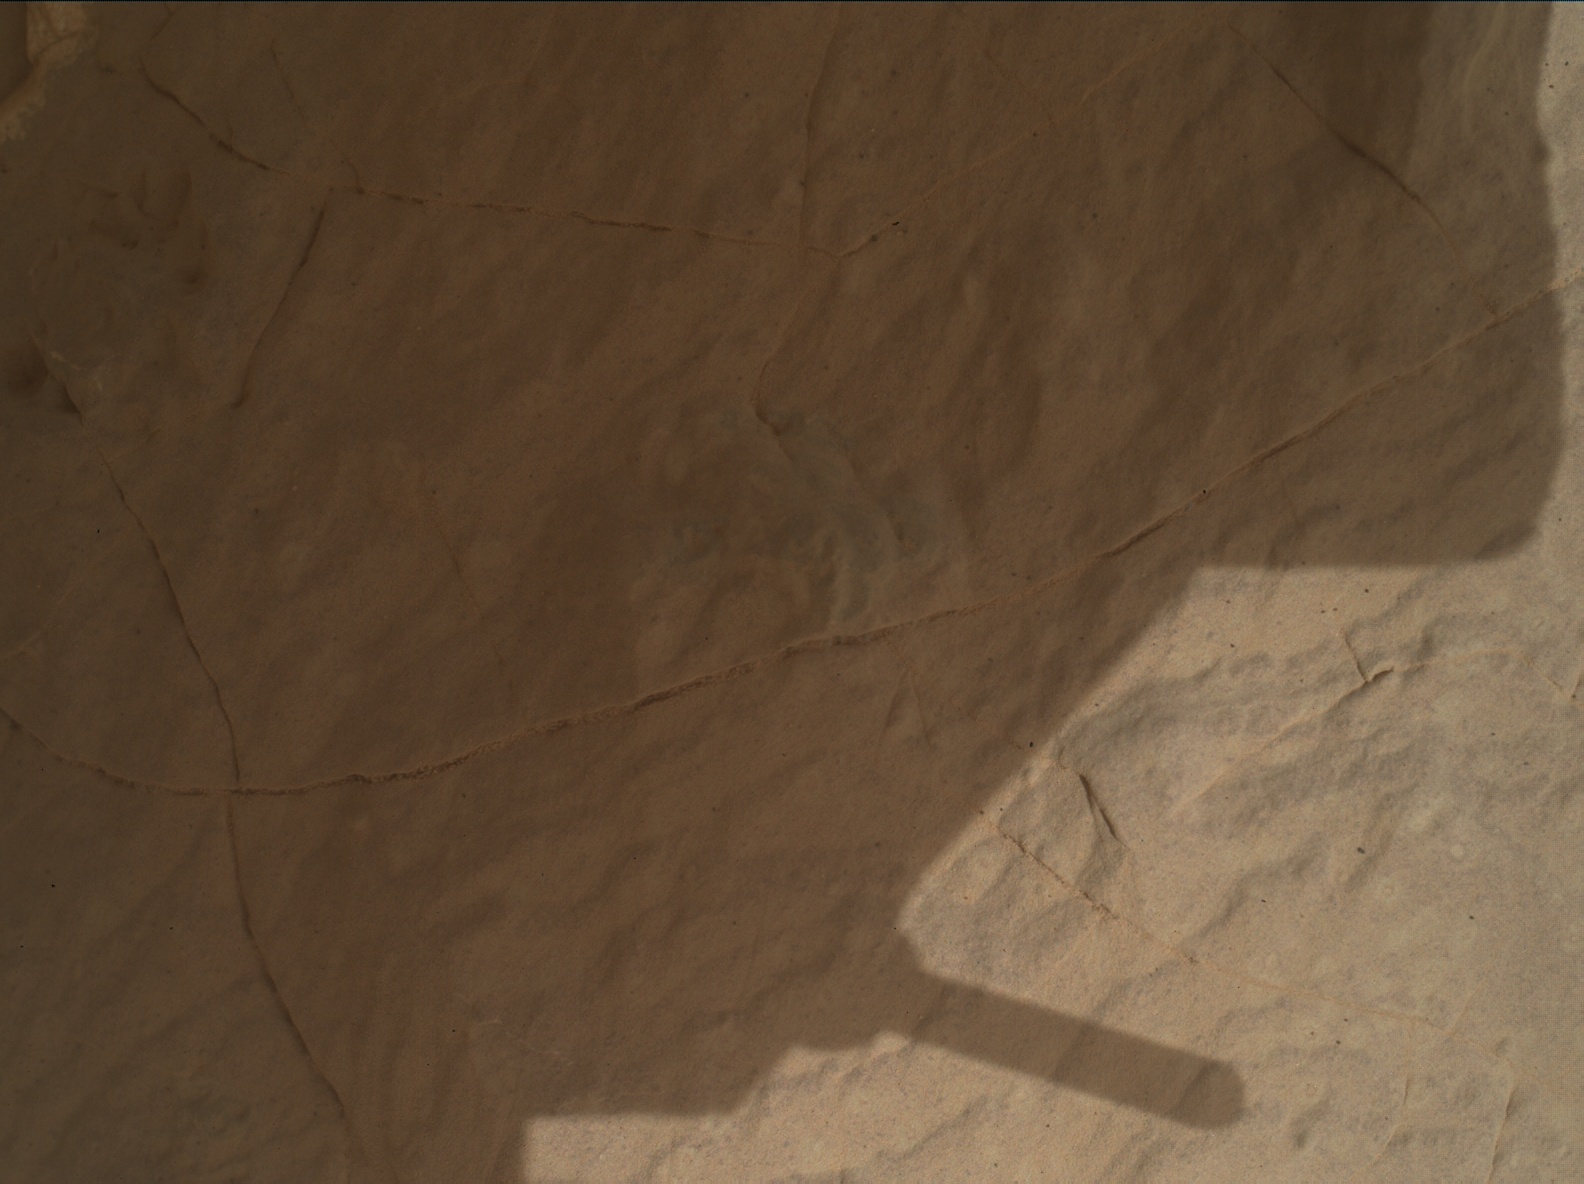 Nasa's Mars rover Curiosity acquired this image using its Mars Hand Lens Imager (MAHLI) on Sol 3015